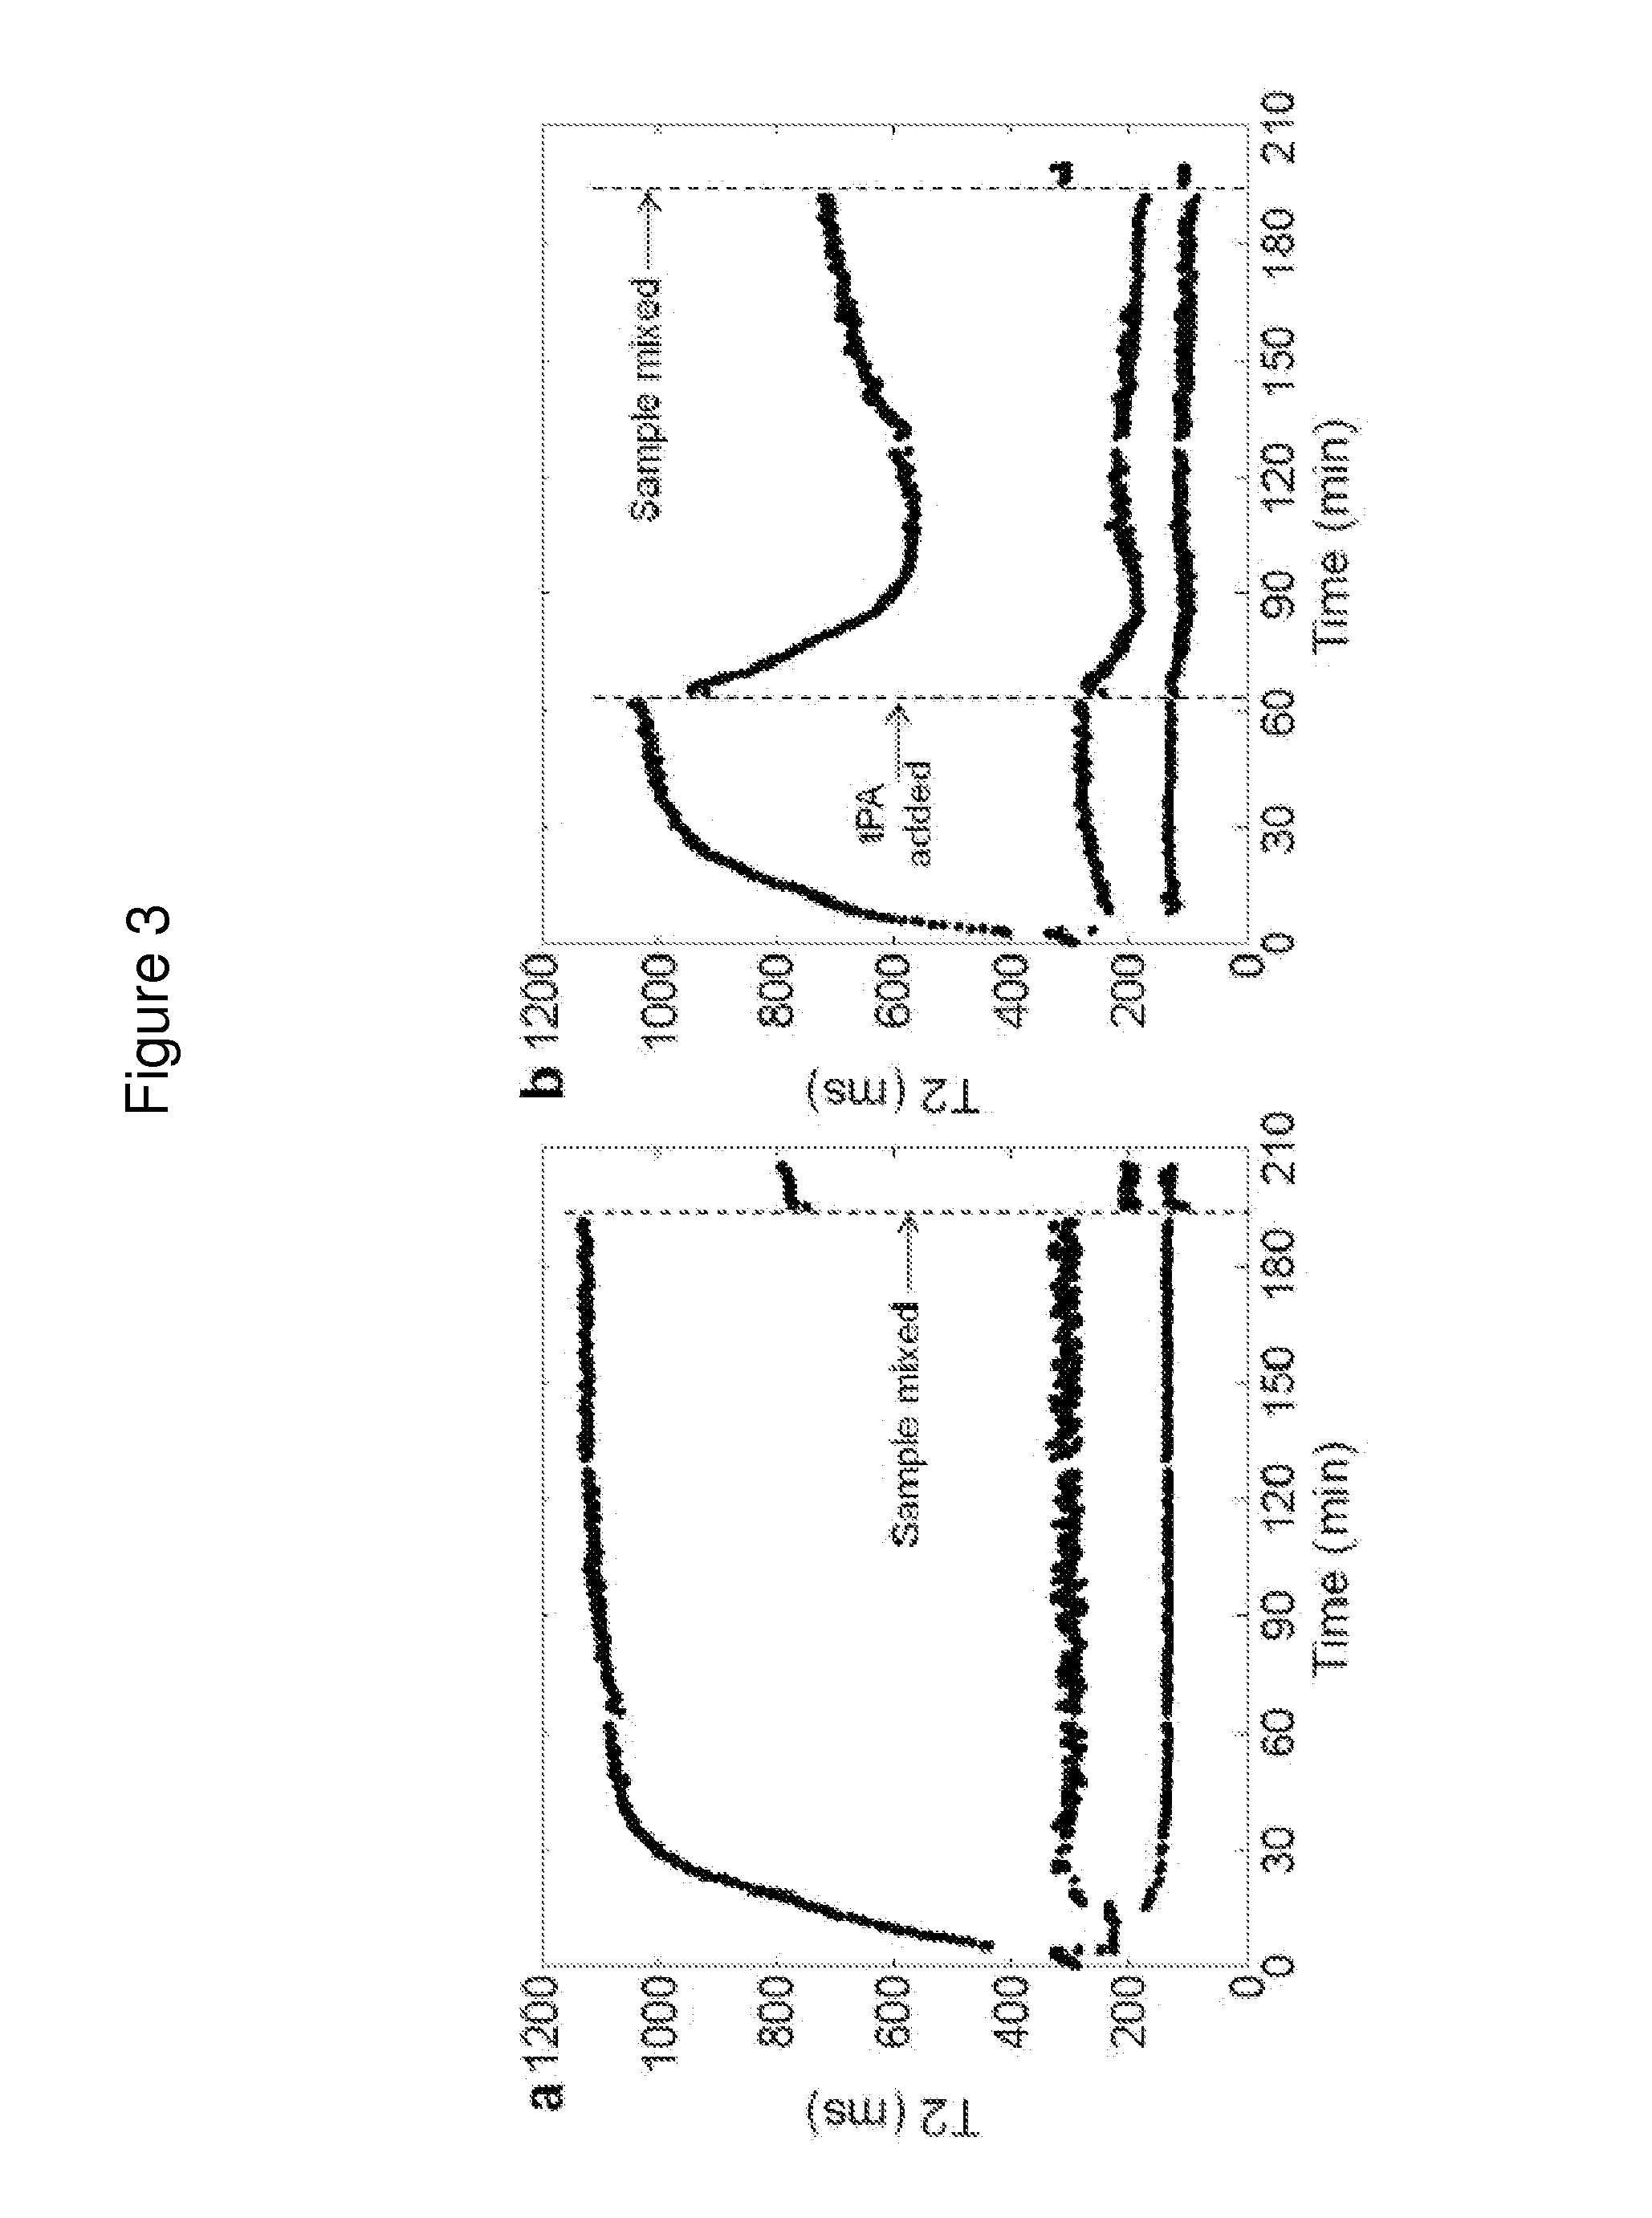 Systems and methods for identifying coagulopathies